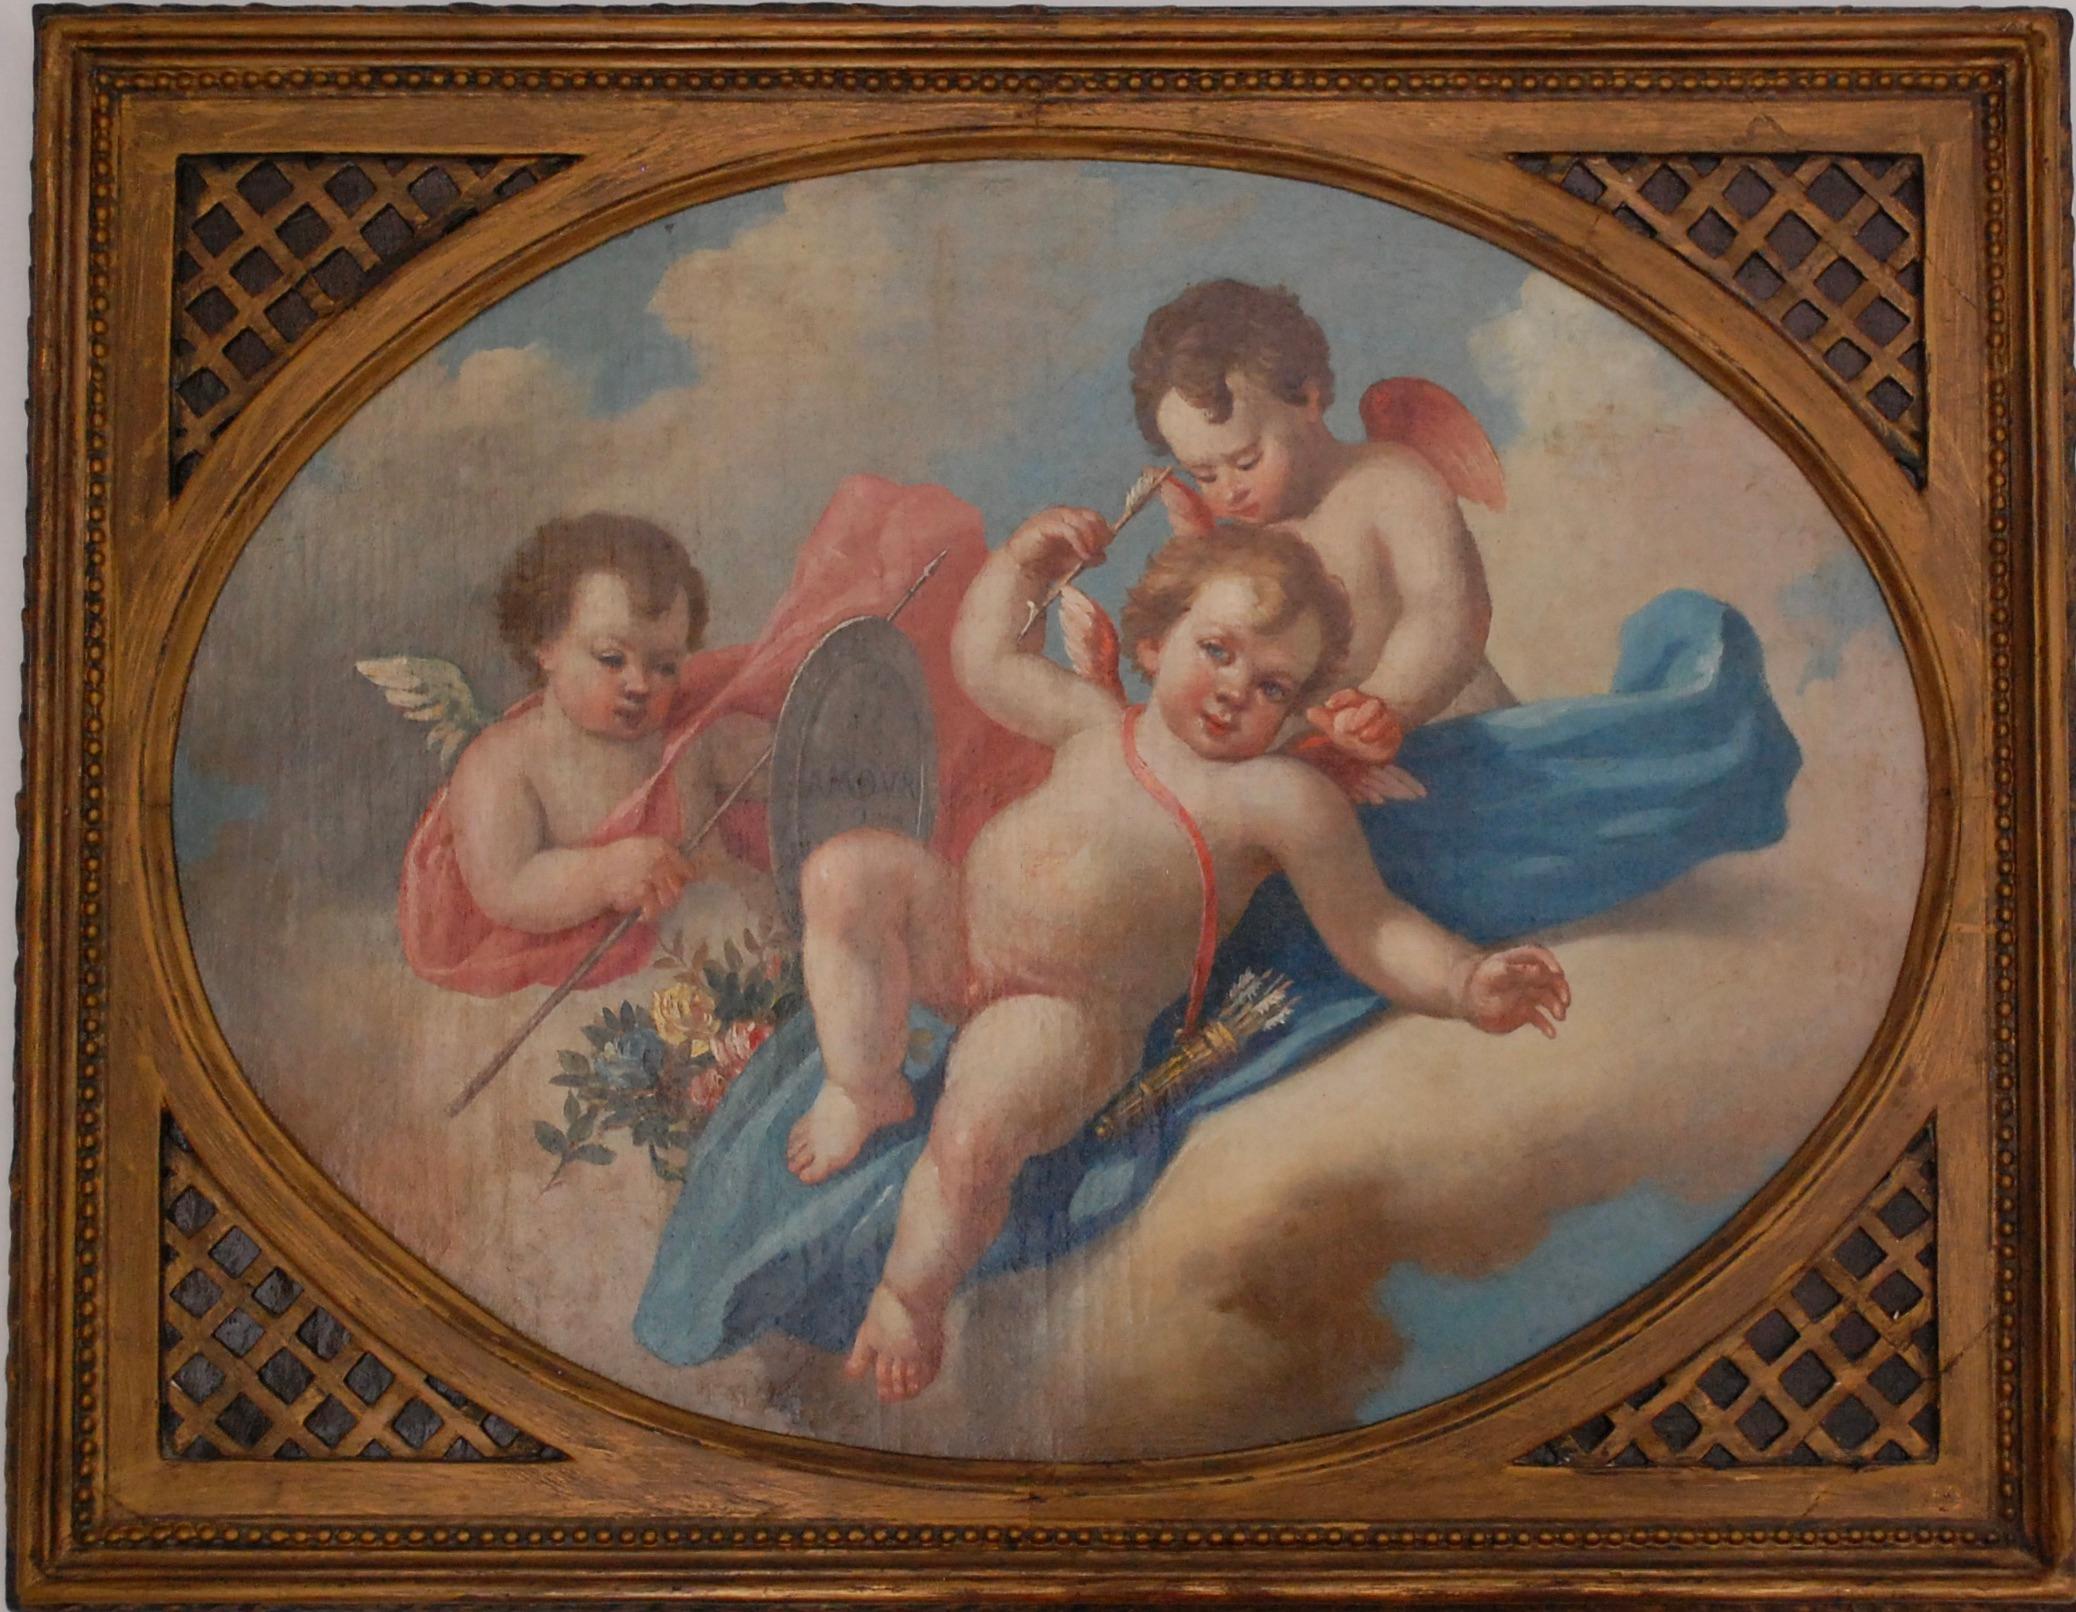  Cherubs Playing With Bow And Arrow  - Brown Figurative Painting by (After) Francois Boucher